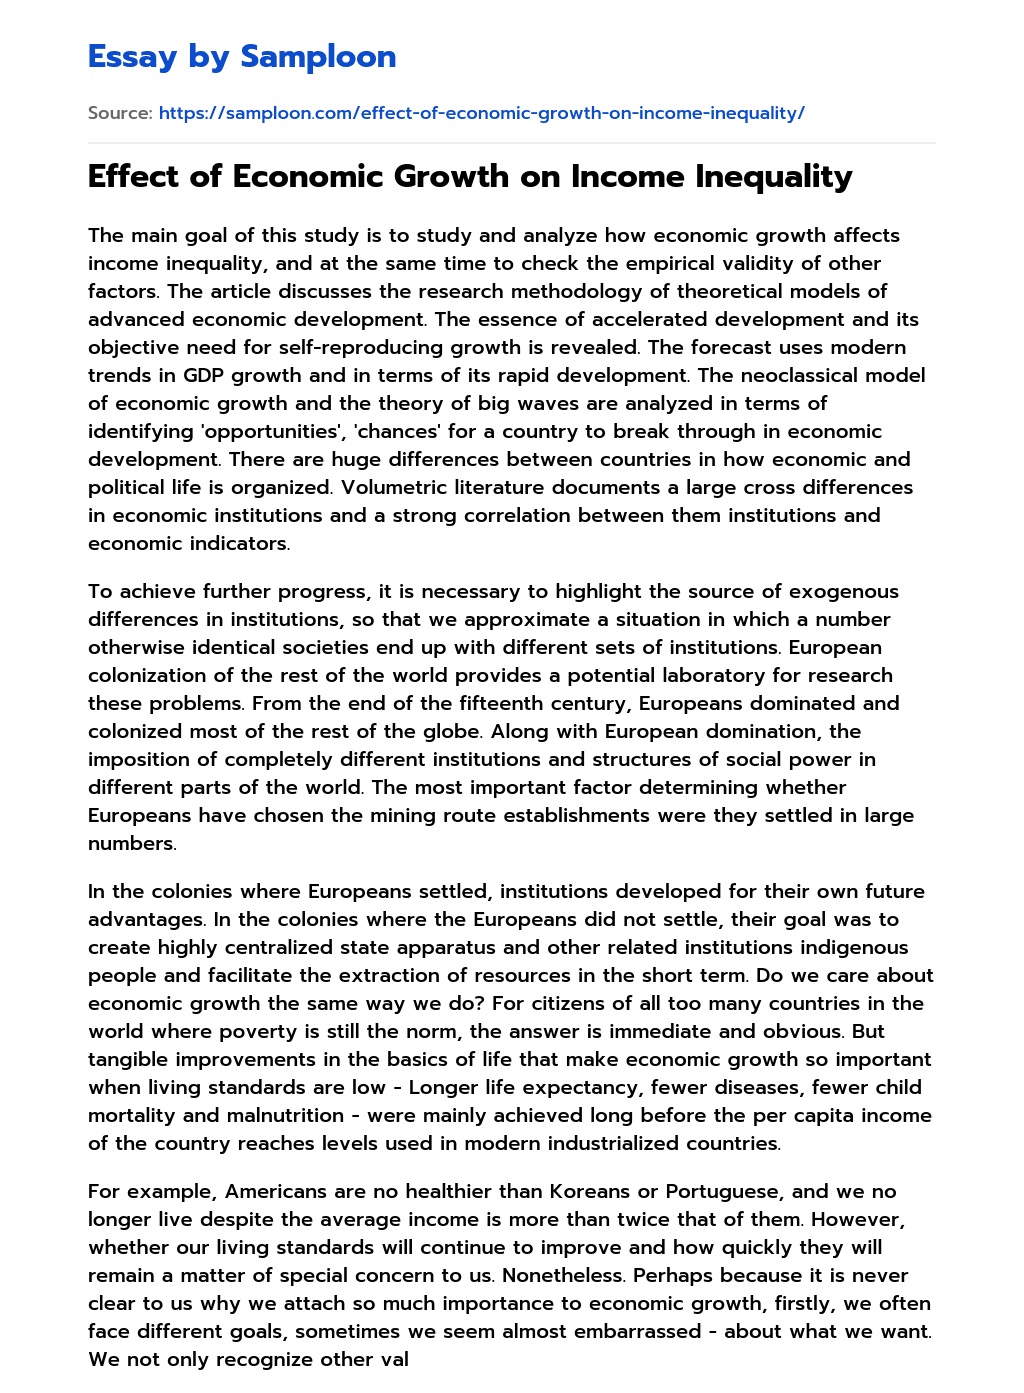 essay on issues of economic growth and justice